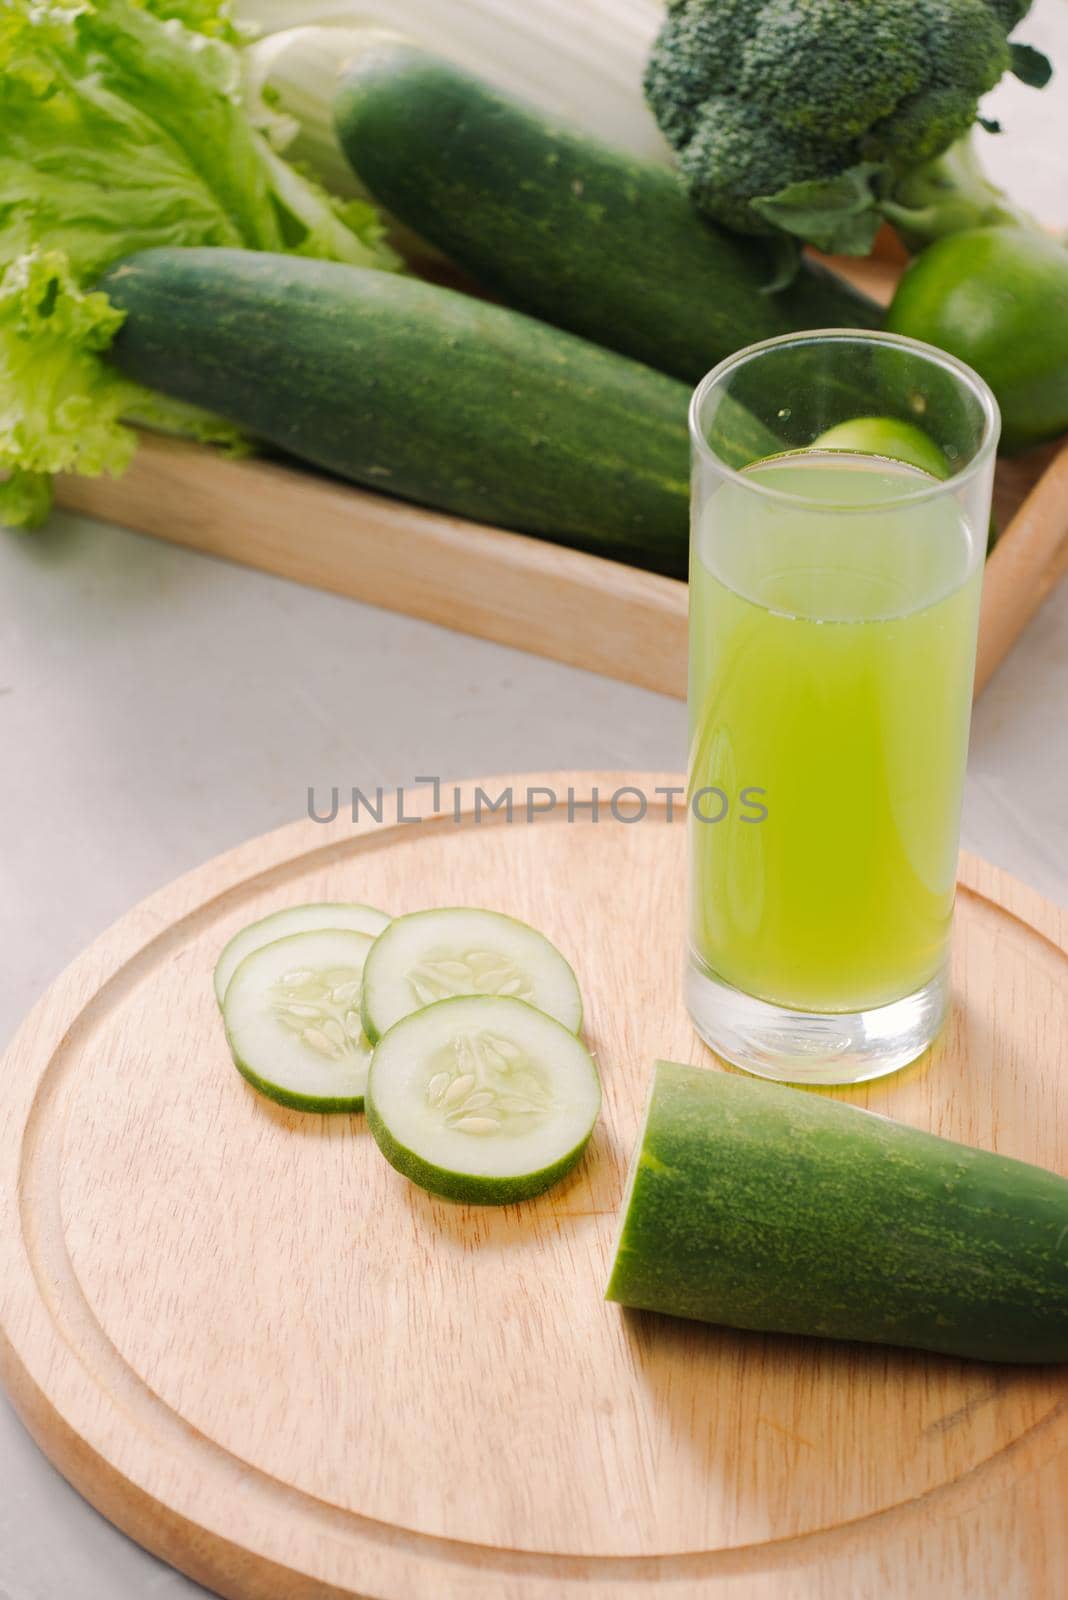 Vegan diet food. Detox drinks. Freshly squeezed juices and smoothies from vegetables. On white background, wooden tray, ingredients. Copy space